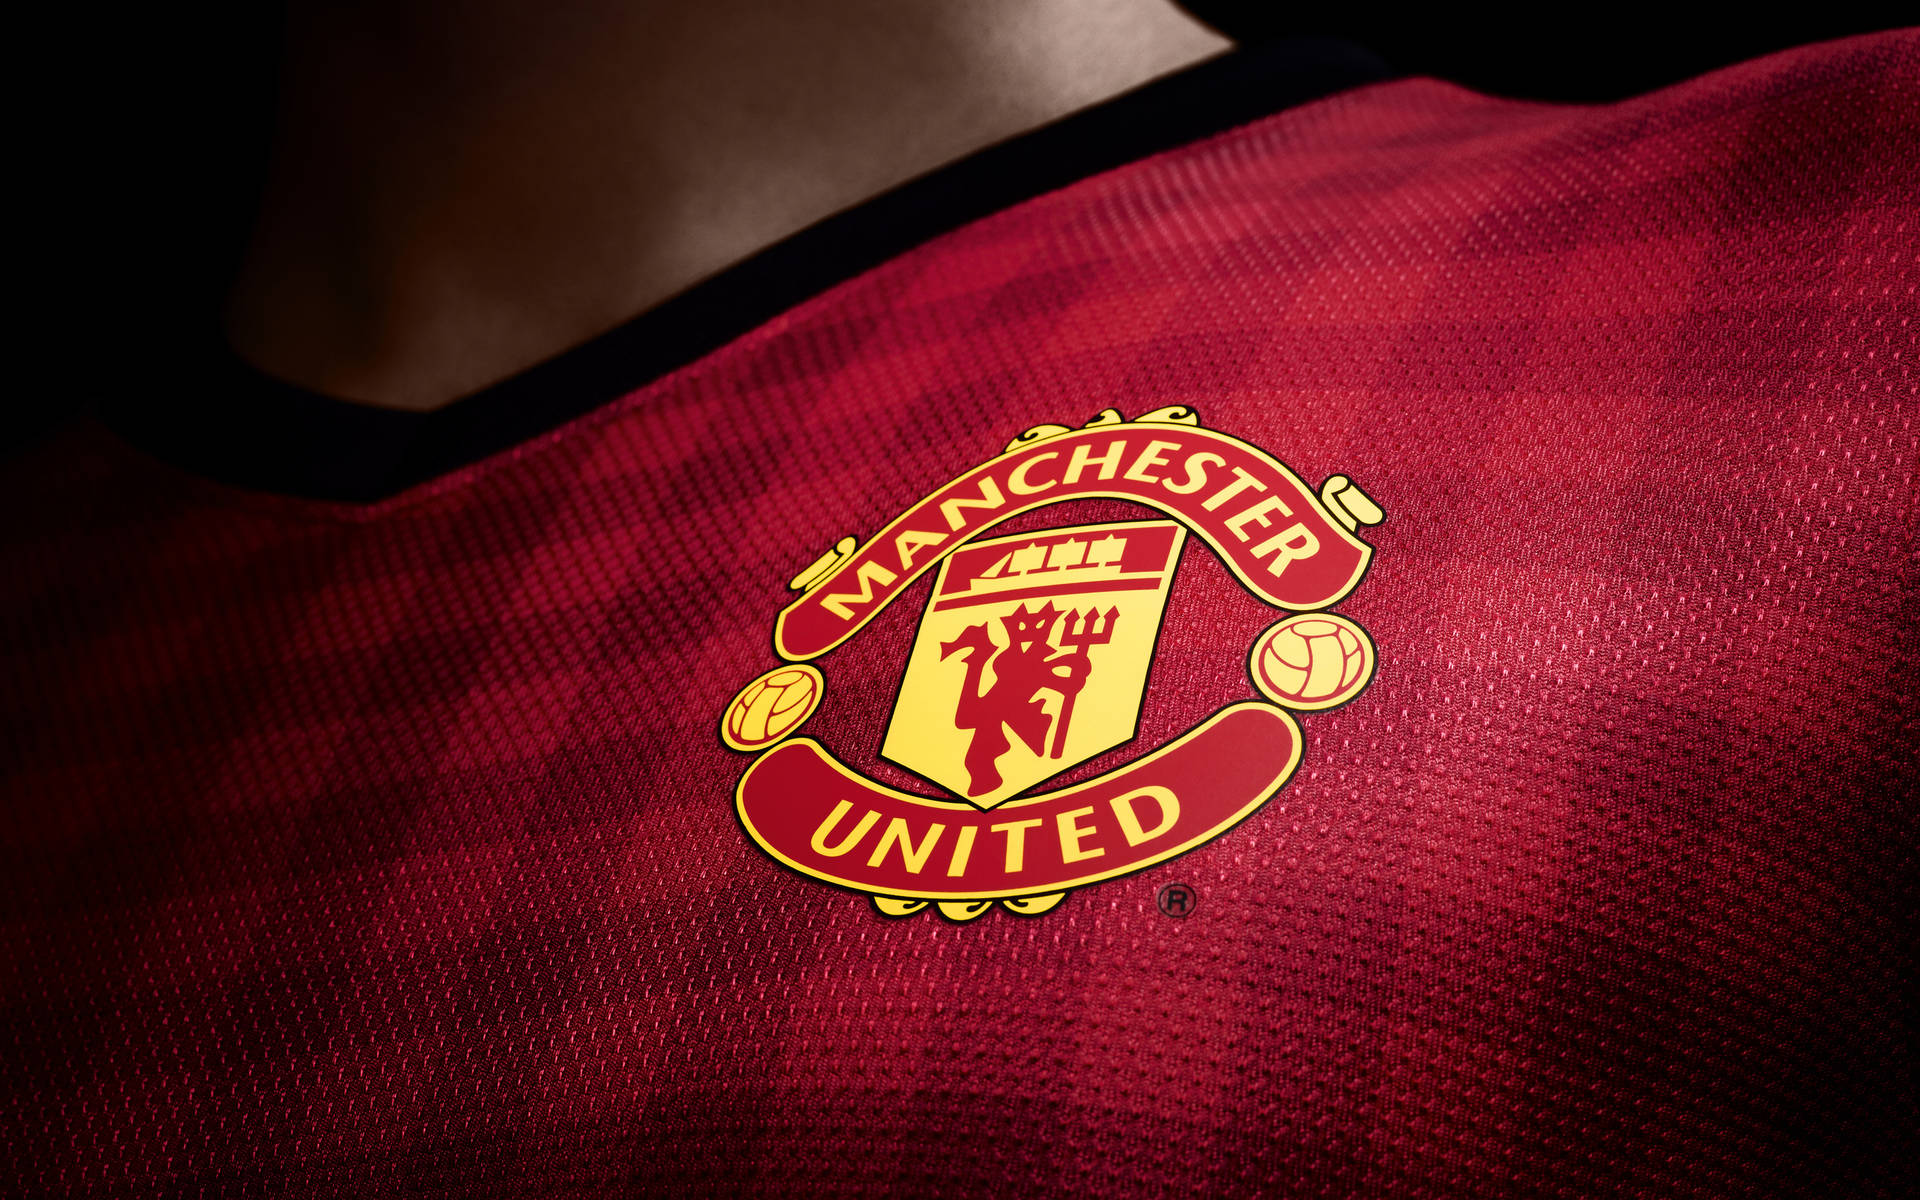 Free Manchester United Wallpaper Downloads, [500+] Manchester United  Wallpapers for FREE 